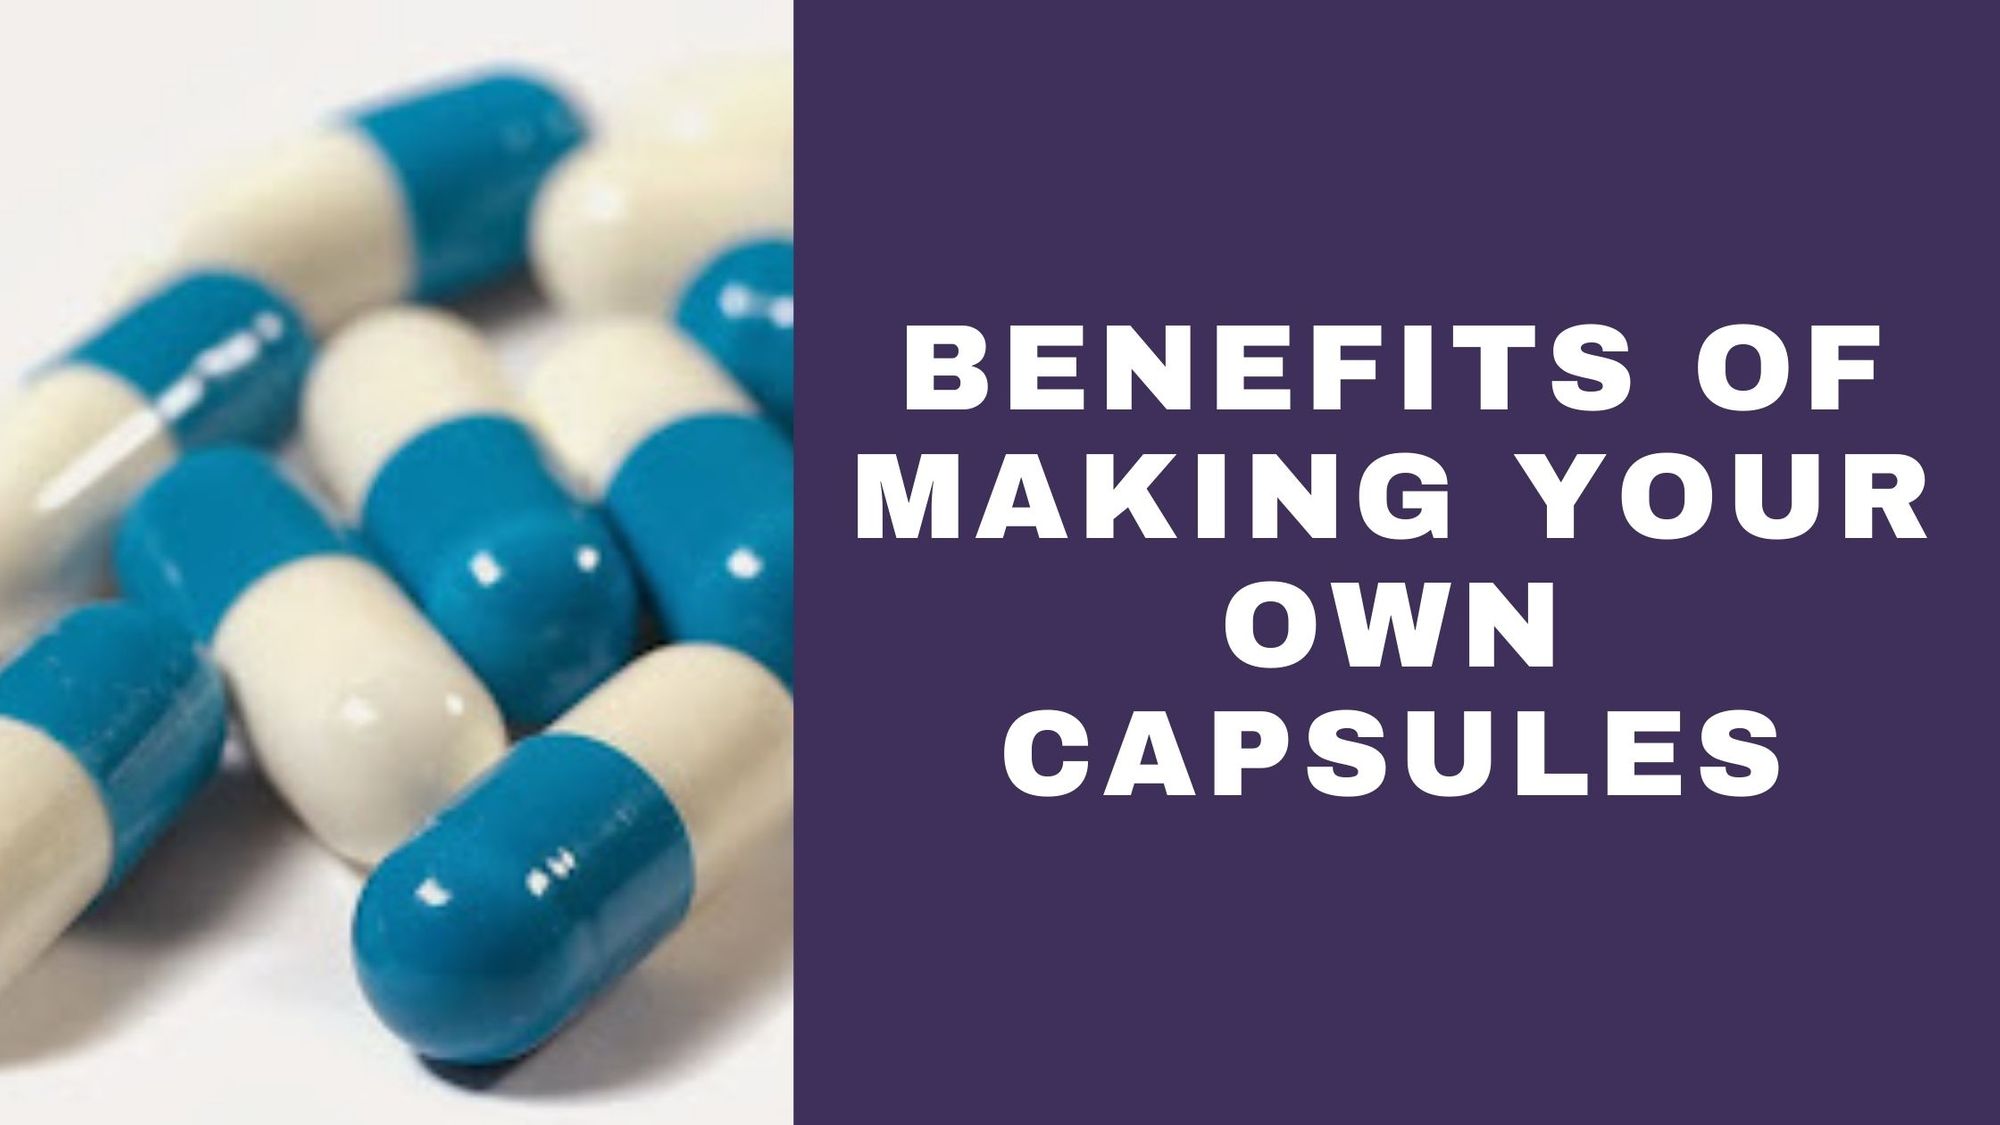 The Benefits of Making Your Own Capsules